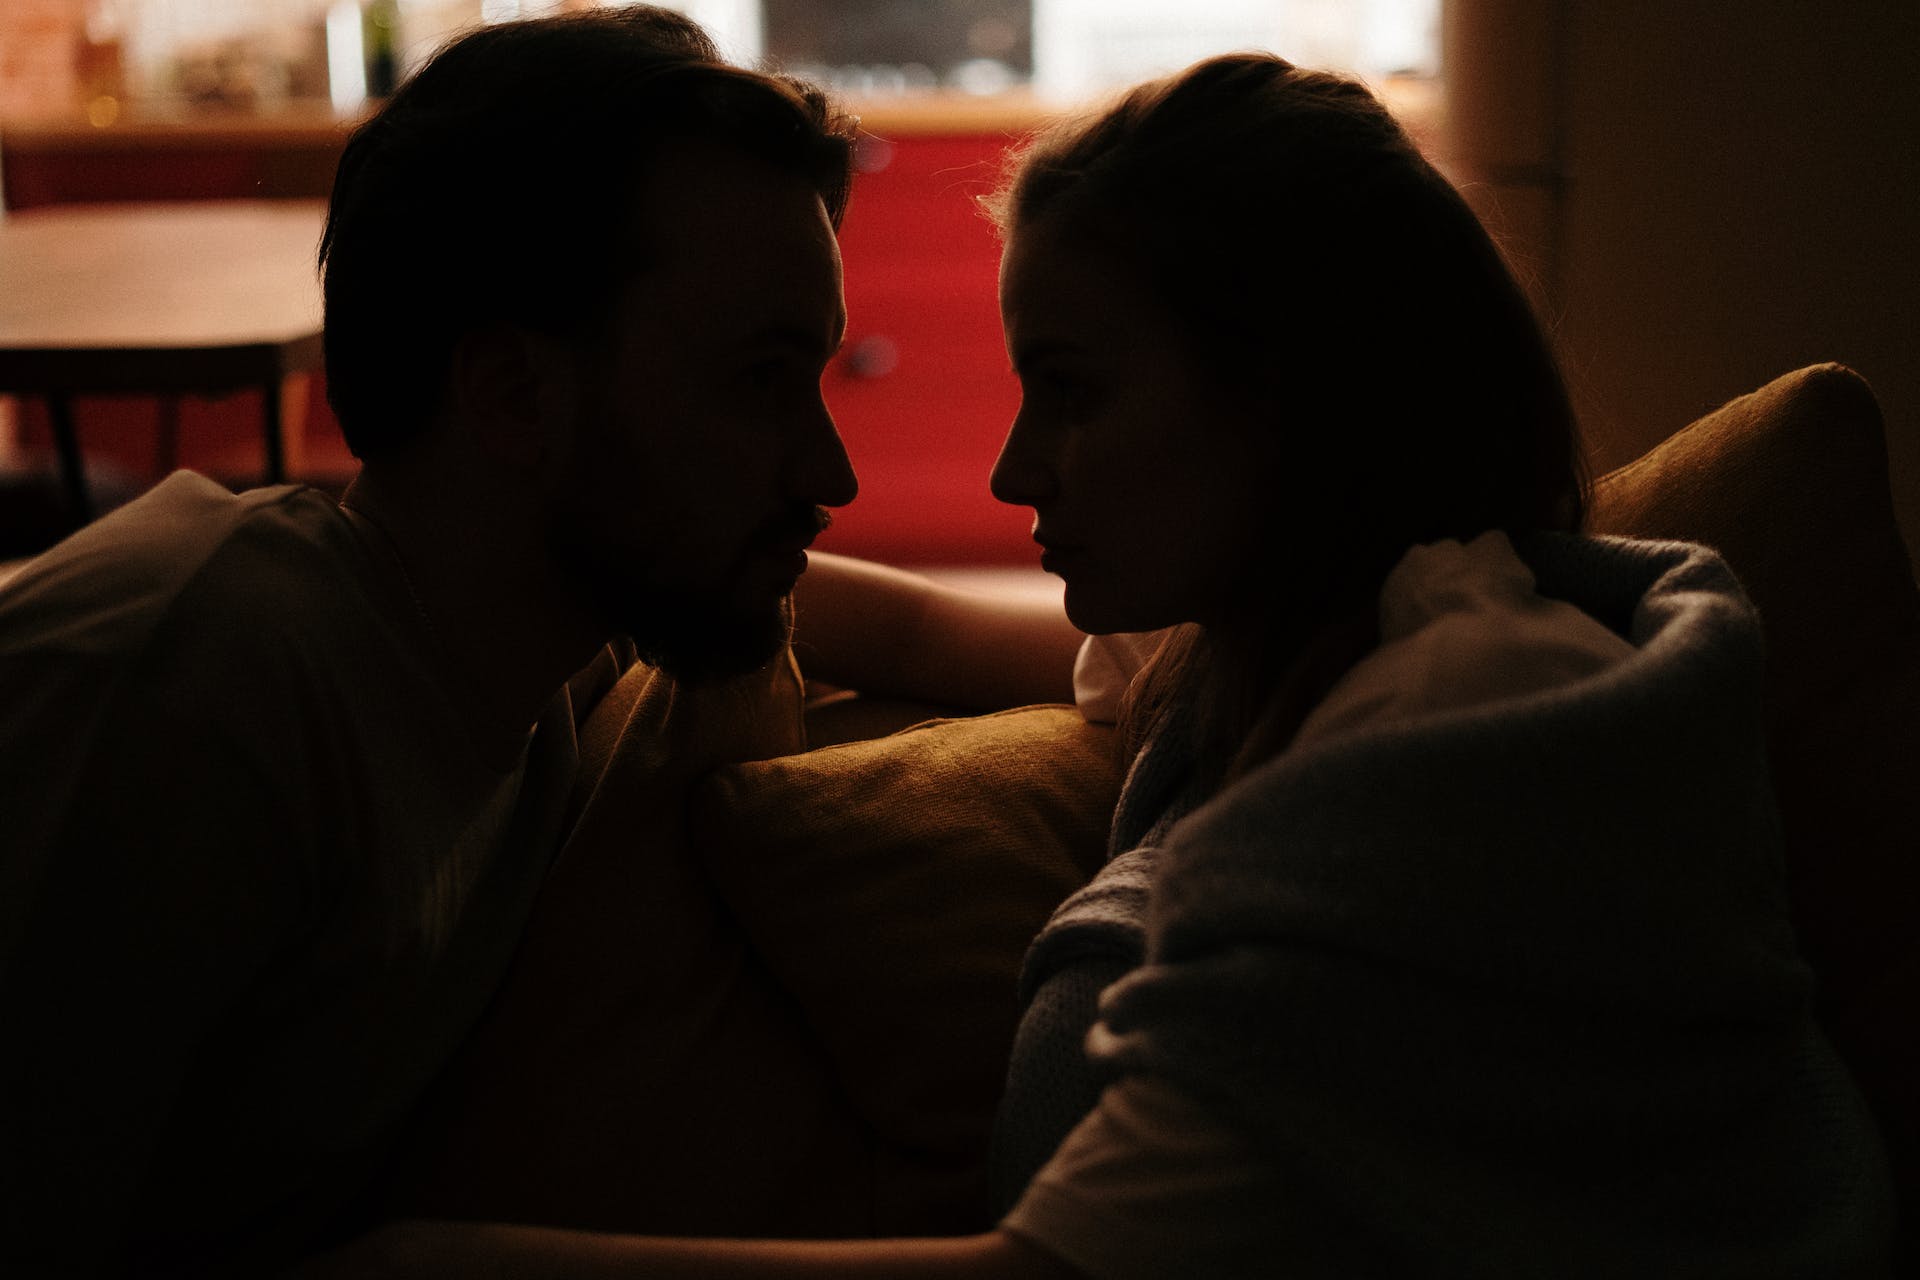 Couple sitting on couch | Source: Pexels